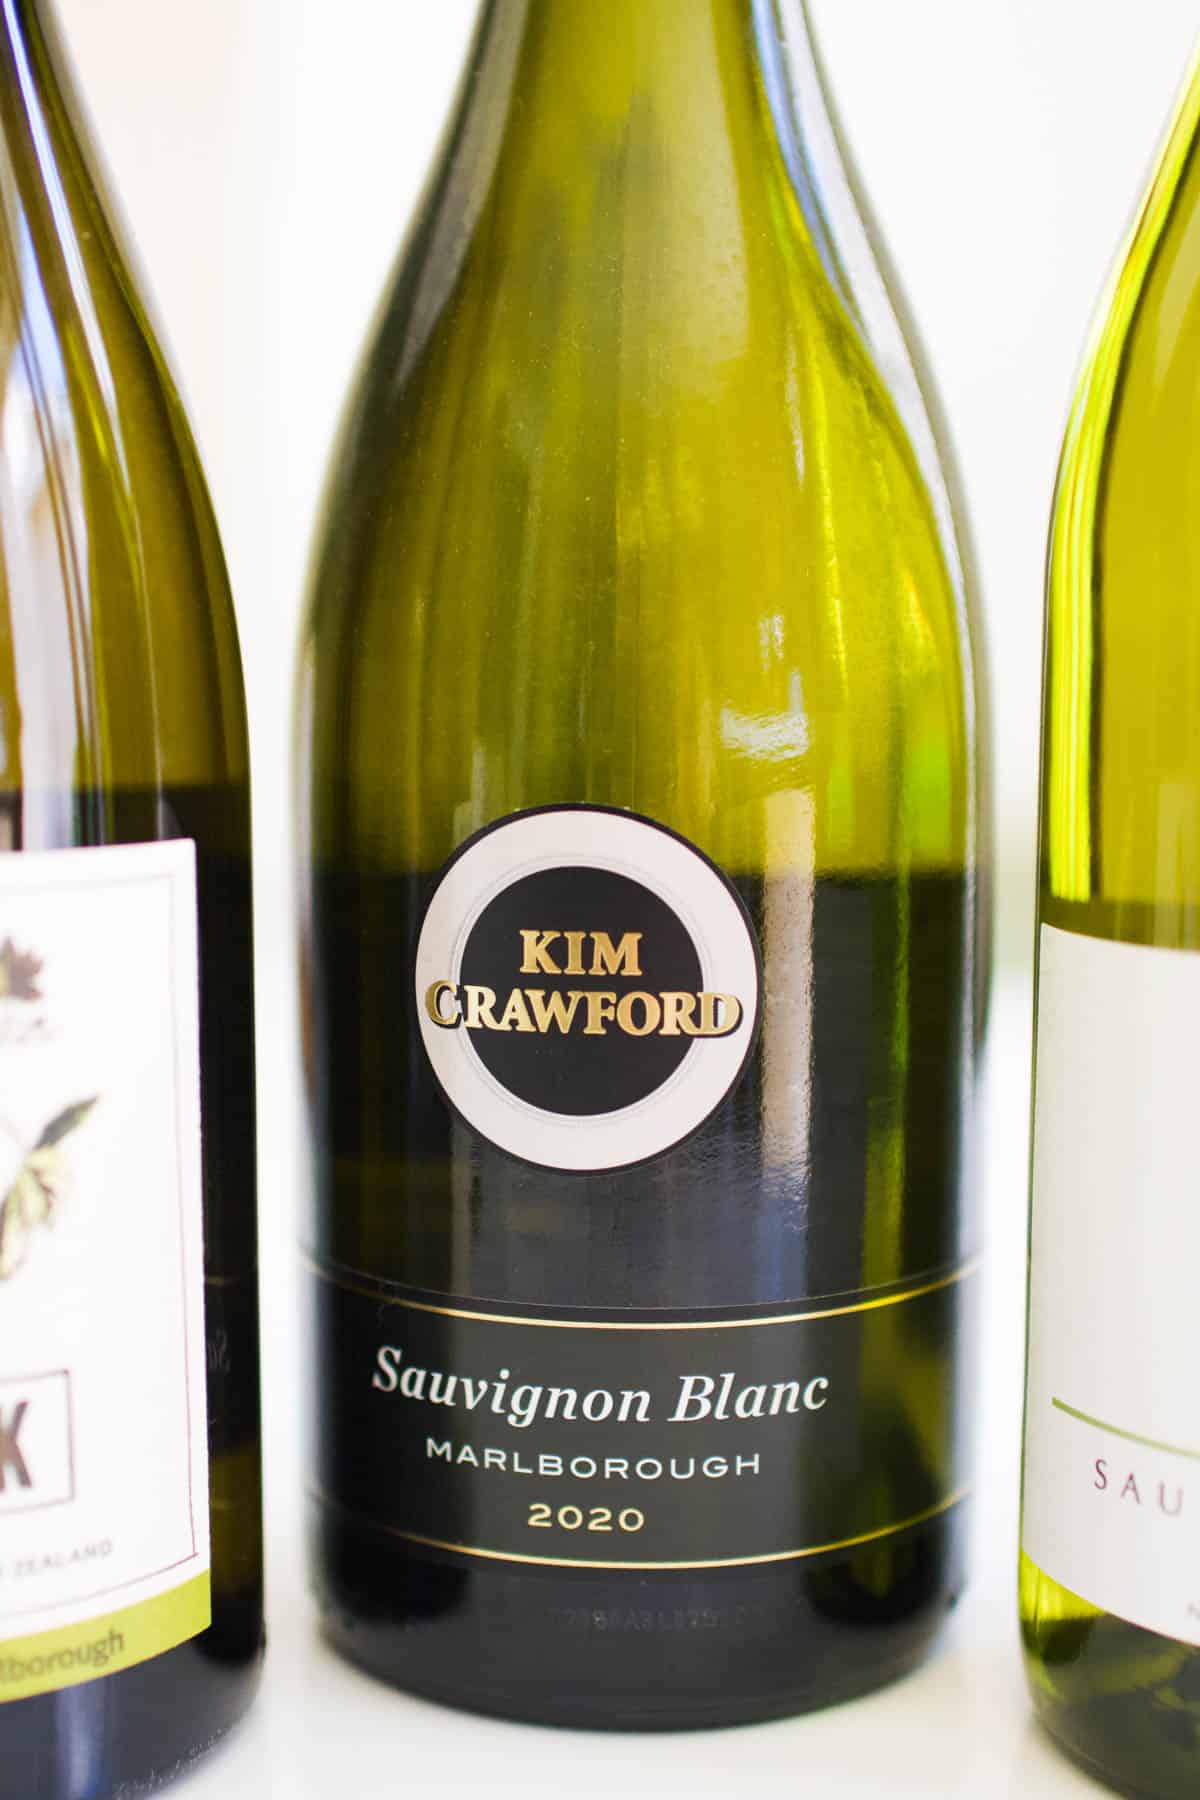 Close up of a Kim Crawford wine bottle.